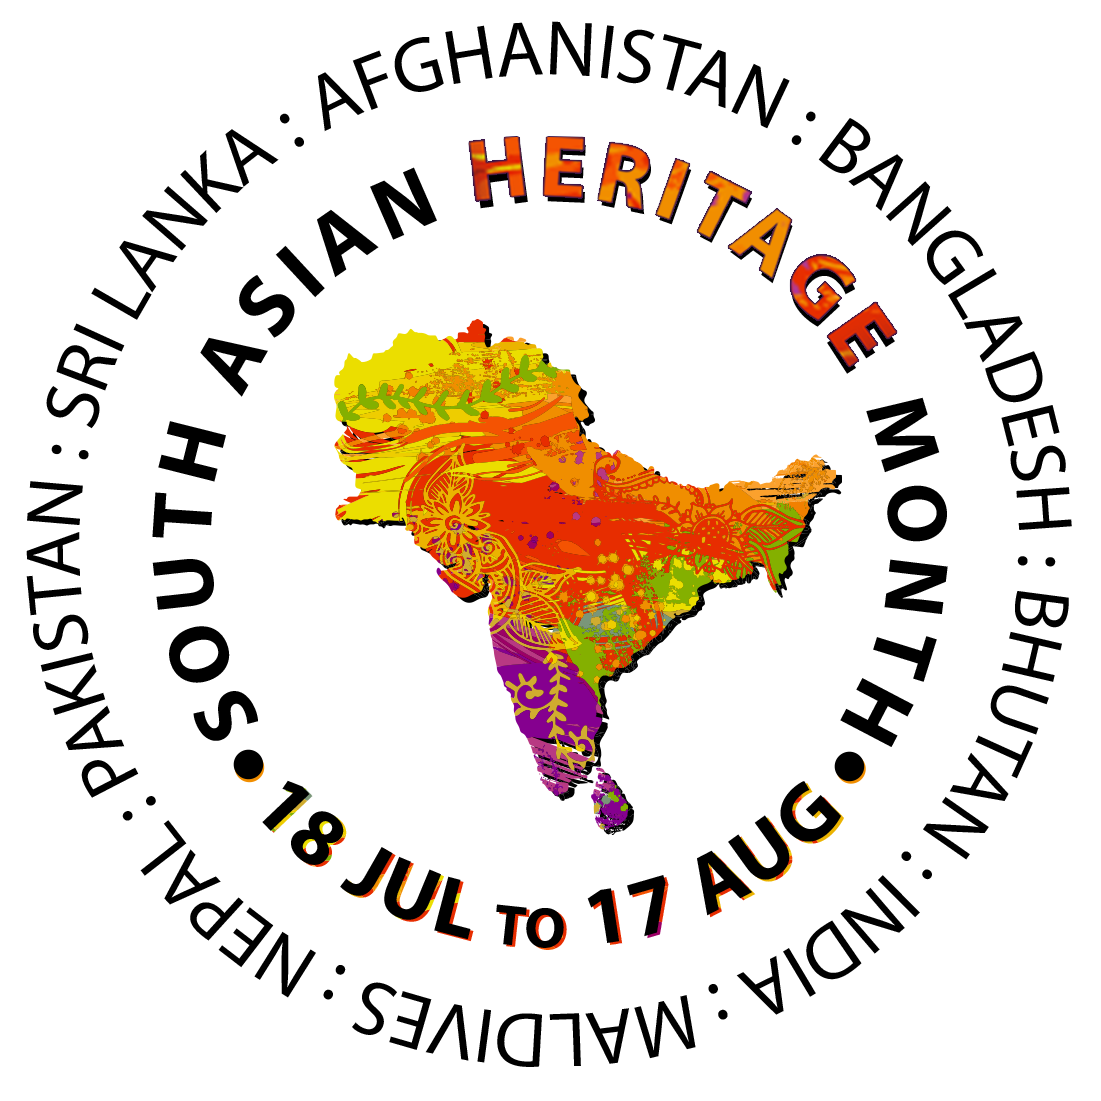 logo for south asian heritage month with an image of South Asia in the middle and the countries listed around it